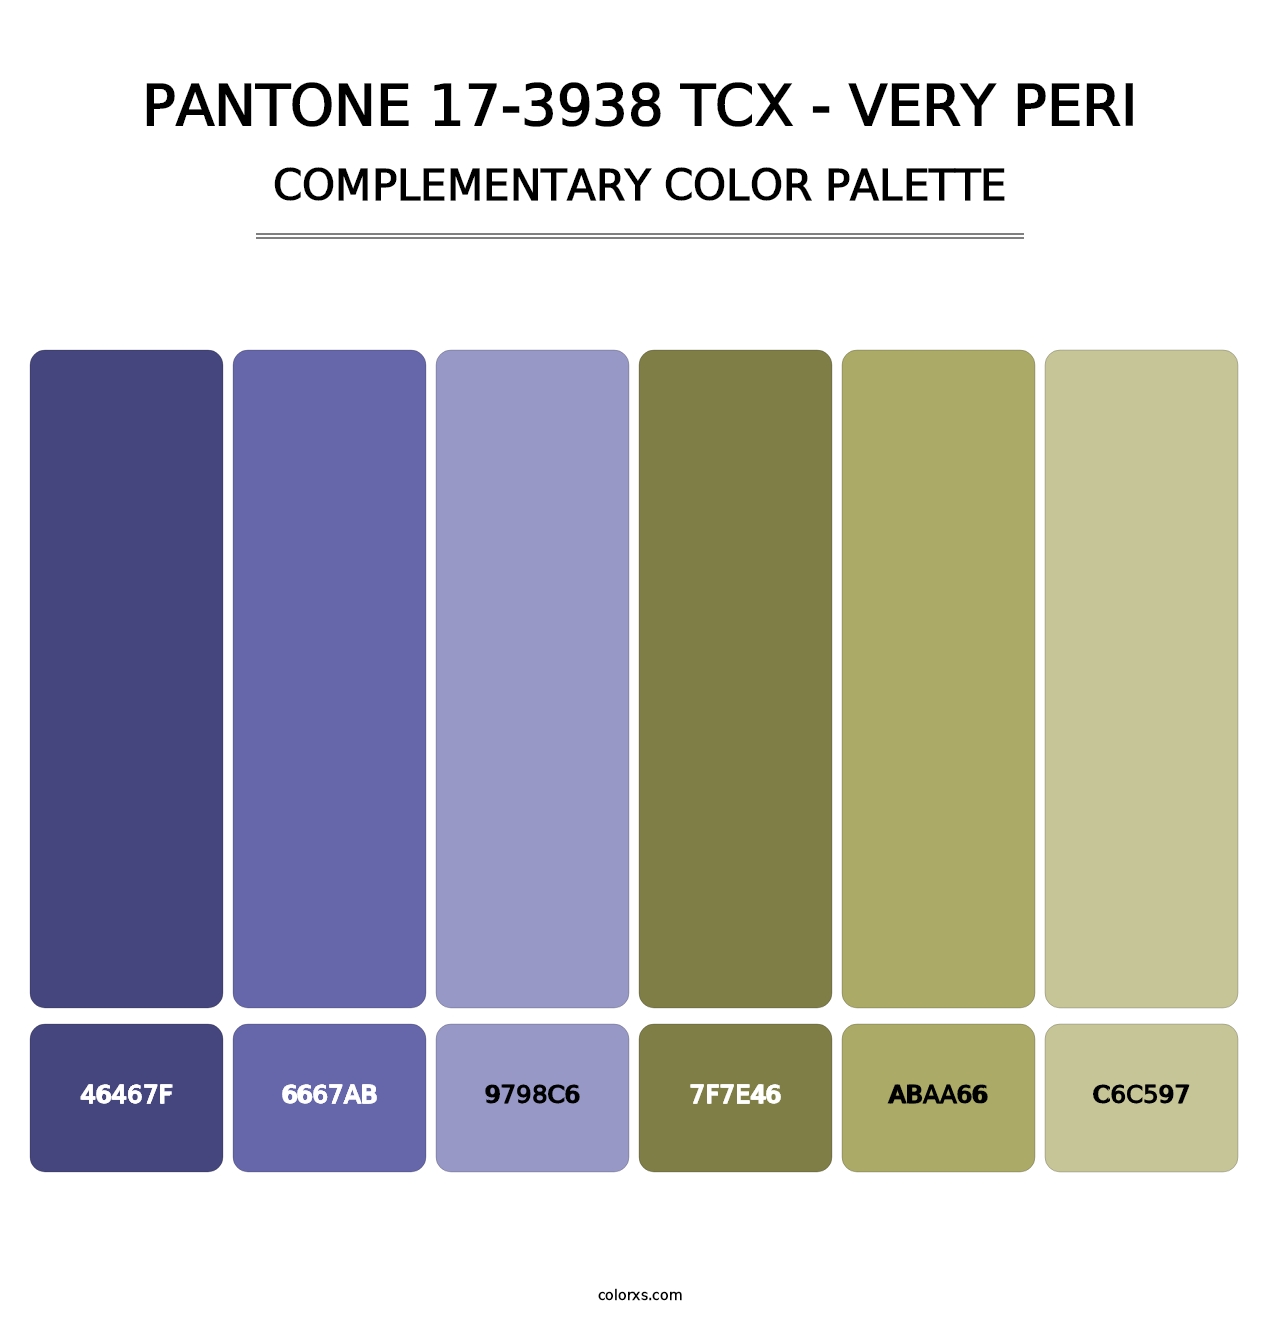 PANTONE 17-3938 TCX - Very Peri - Complementary Color Palette